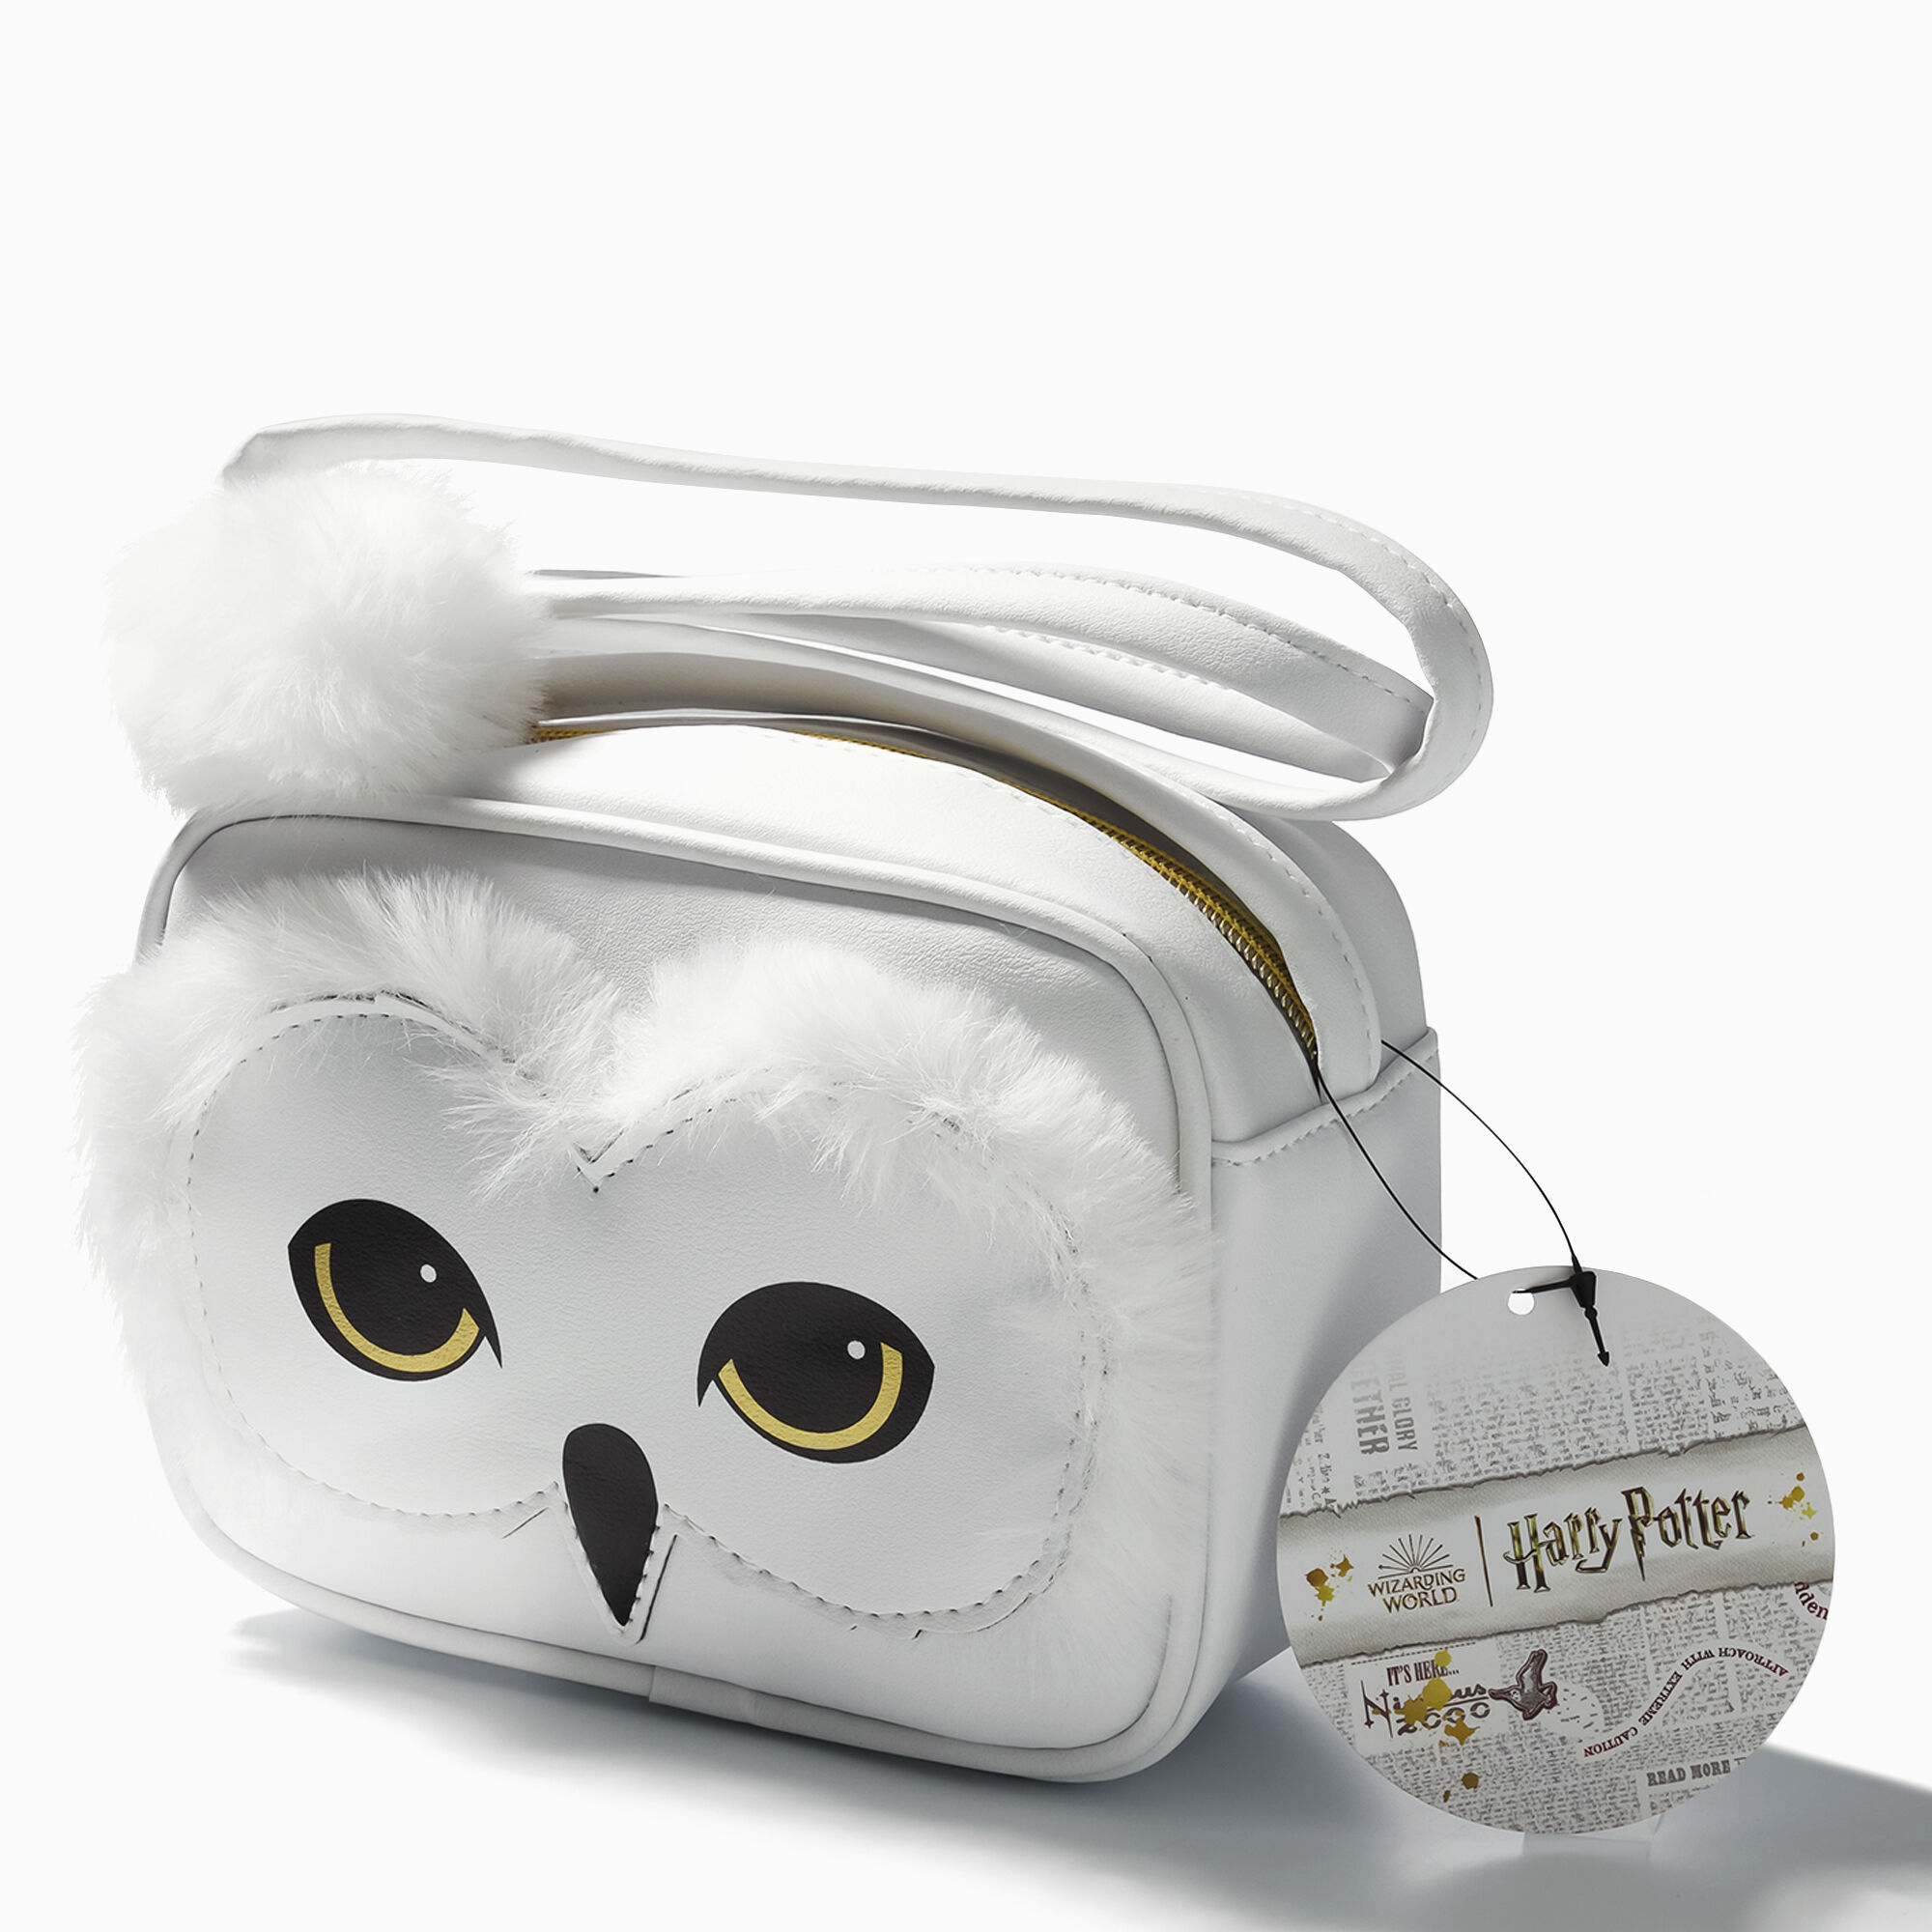 View Claires Harry Potter Hedwig Crossbody Bag information